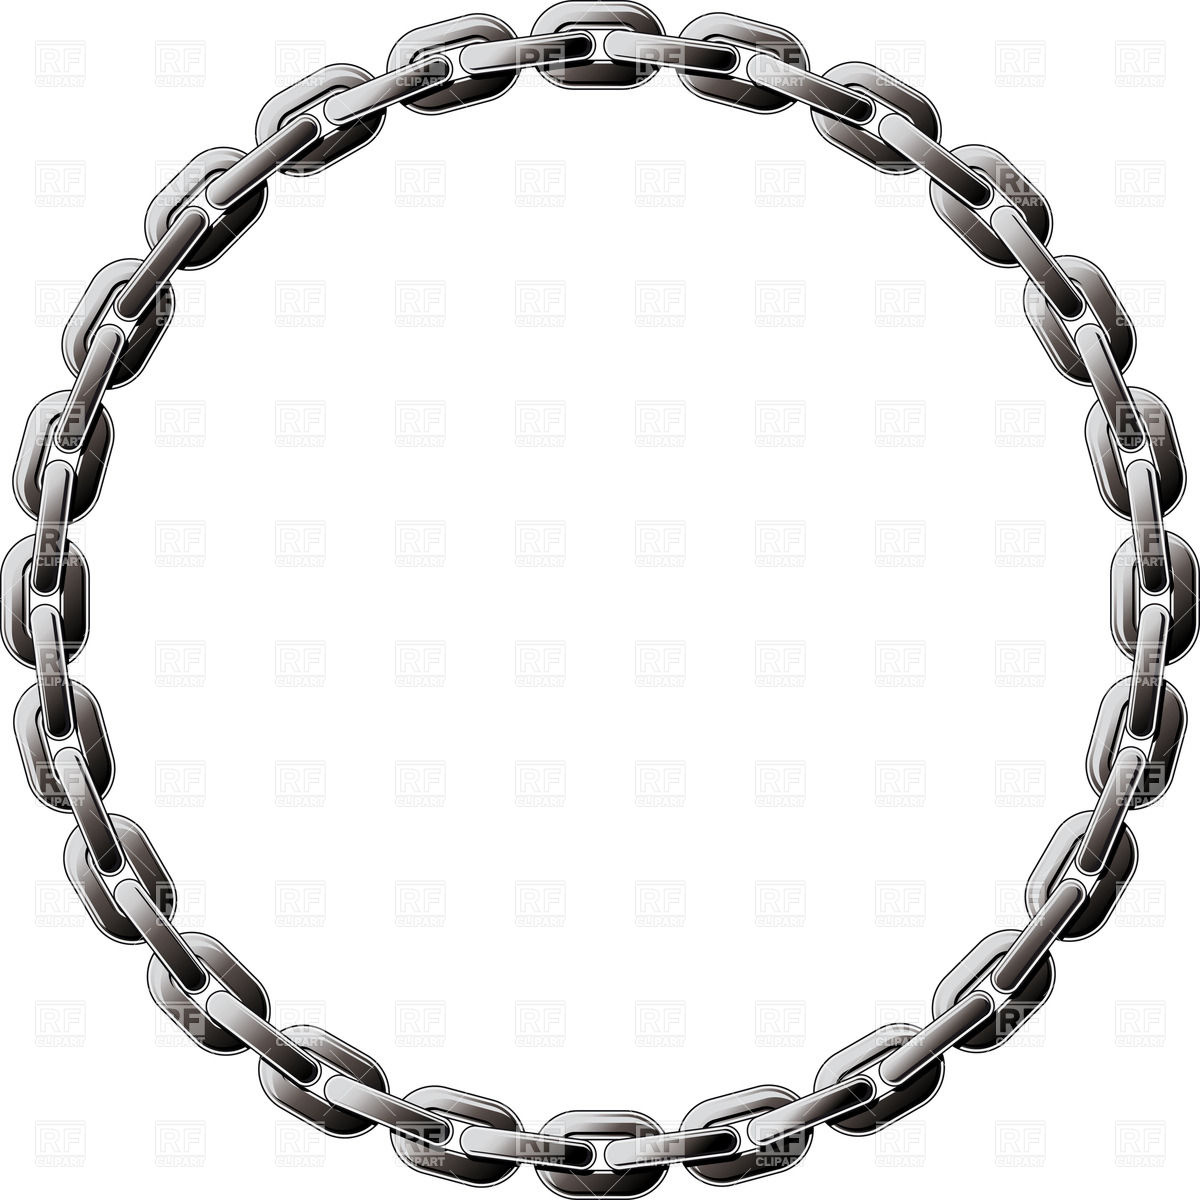 Steel Chain Coiled In A Circle Download Royalty Free Vector Clipart